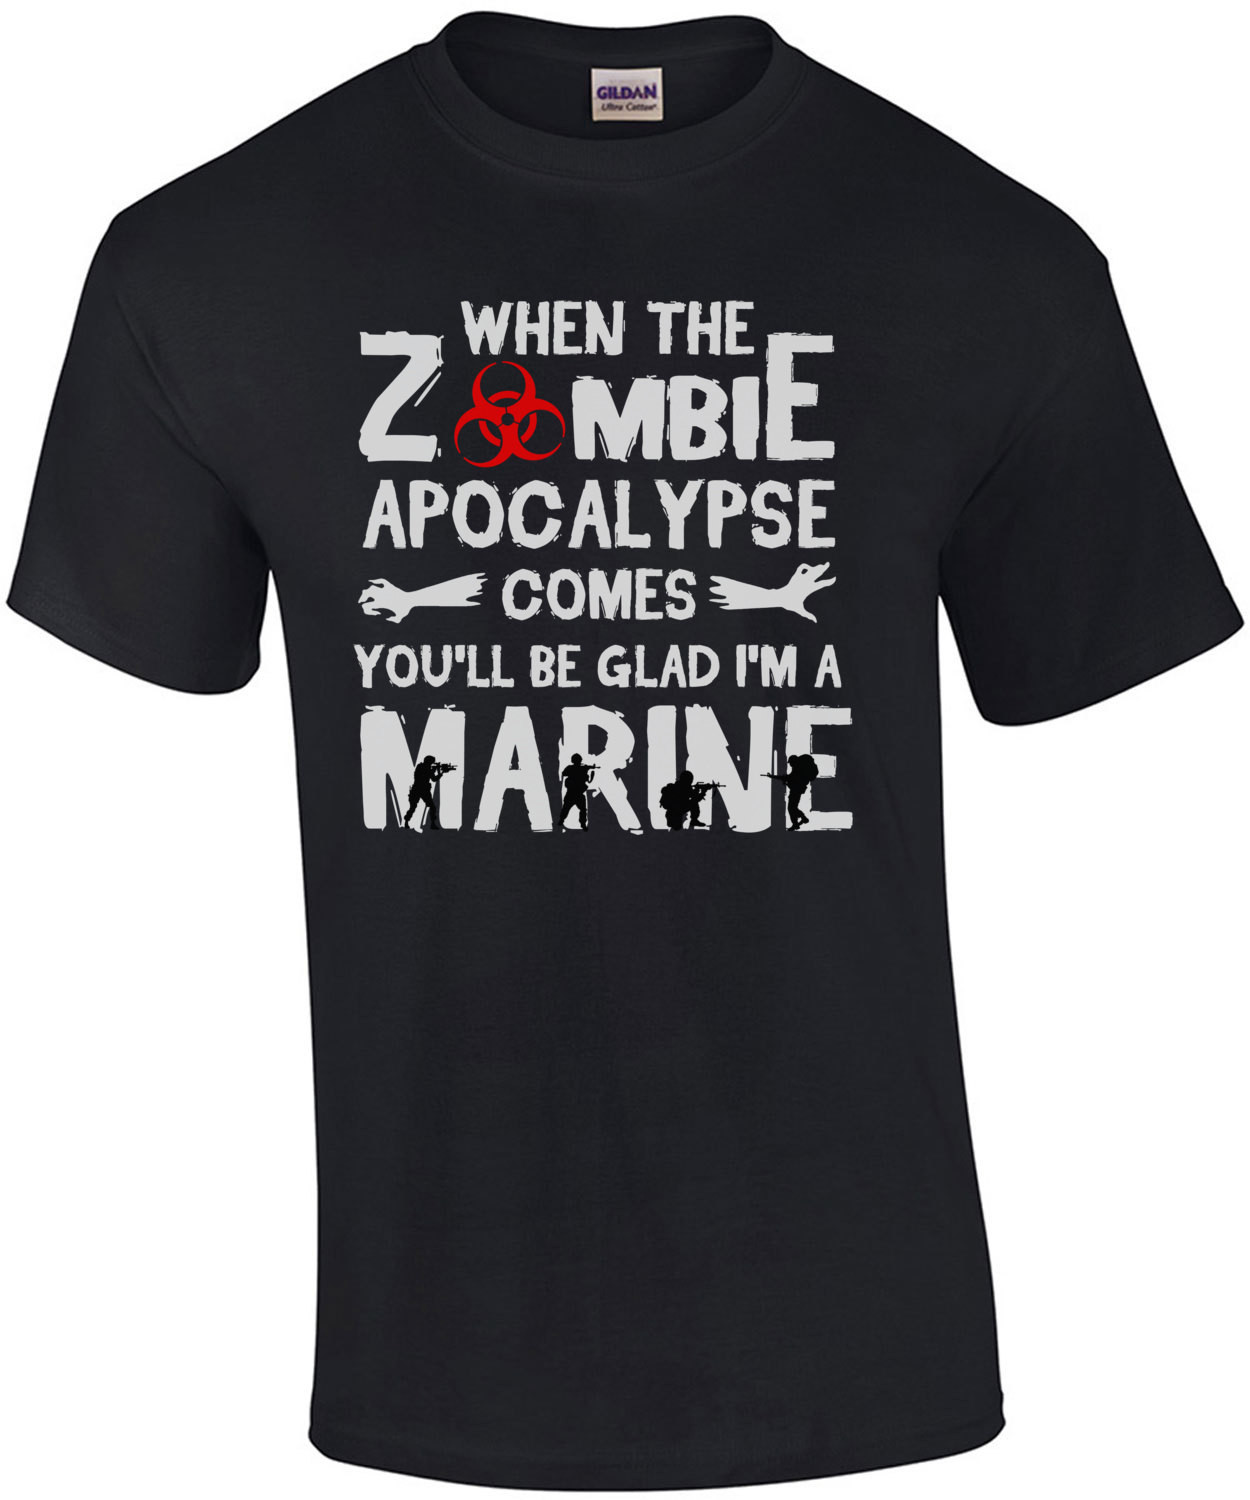 When The Zombie Apocalypse Comes You'll Be Glad I'm A Marine T-Shirt